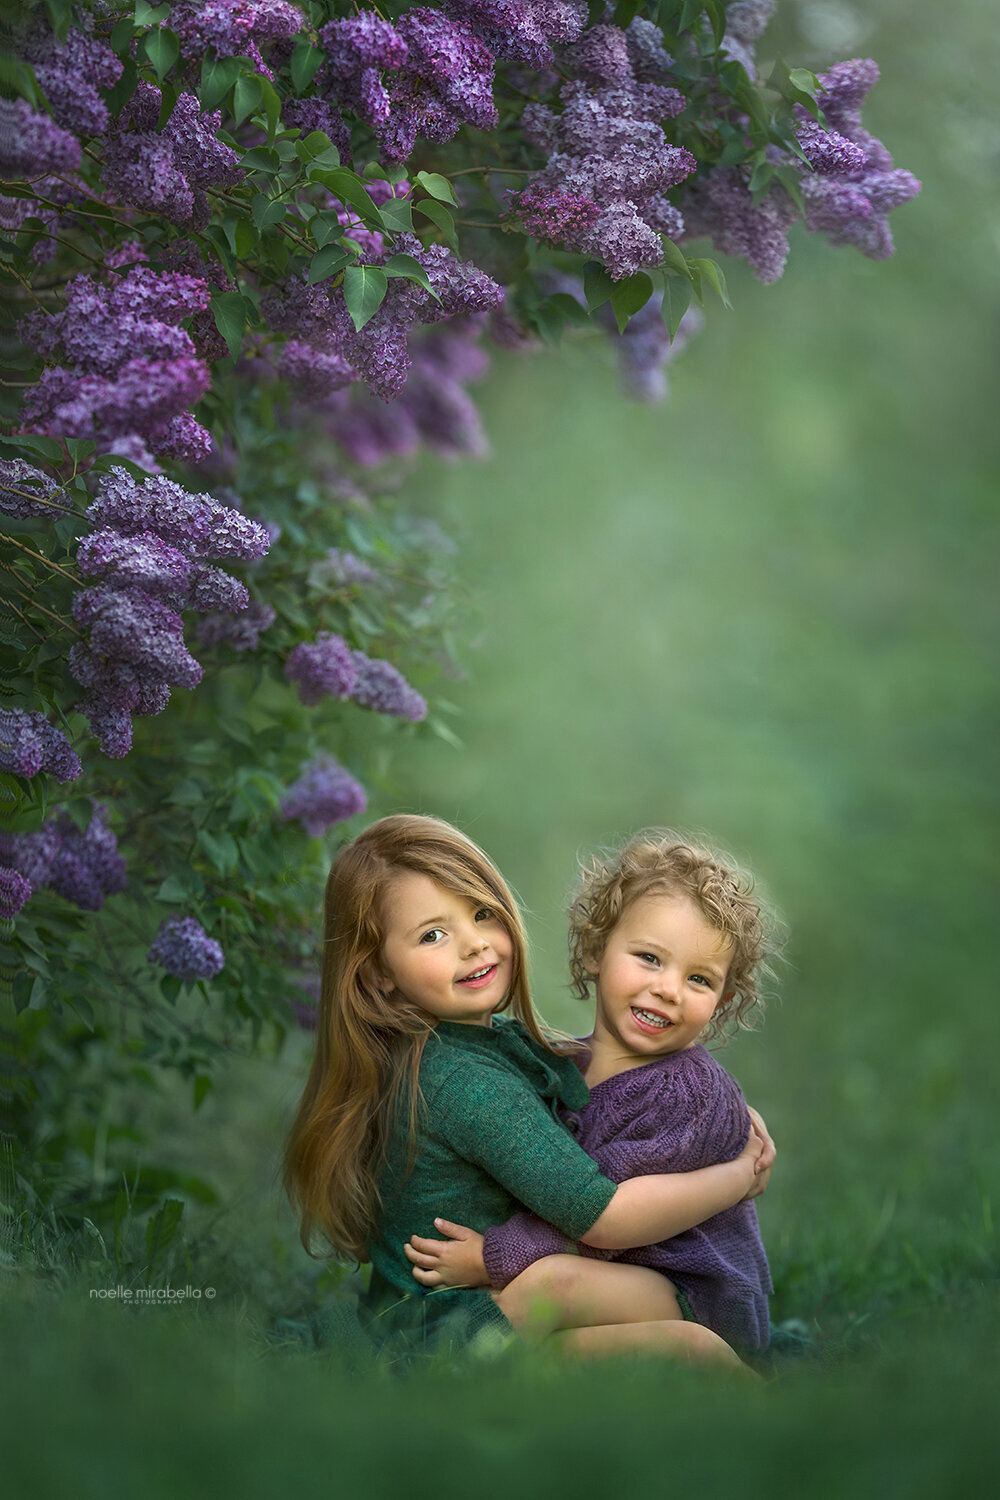 Girls in knit dresses hugging under purple lilac blossoms